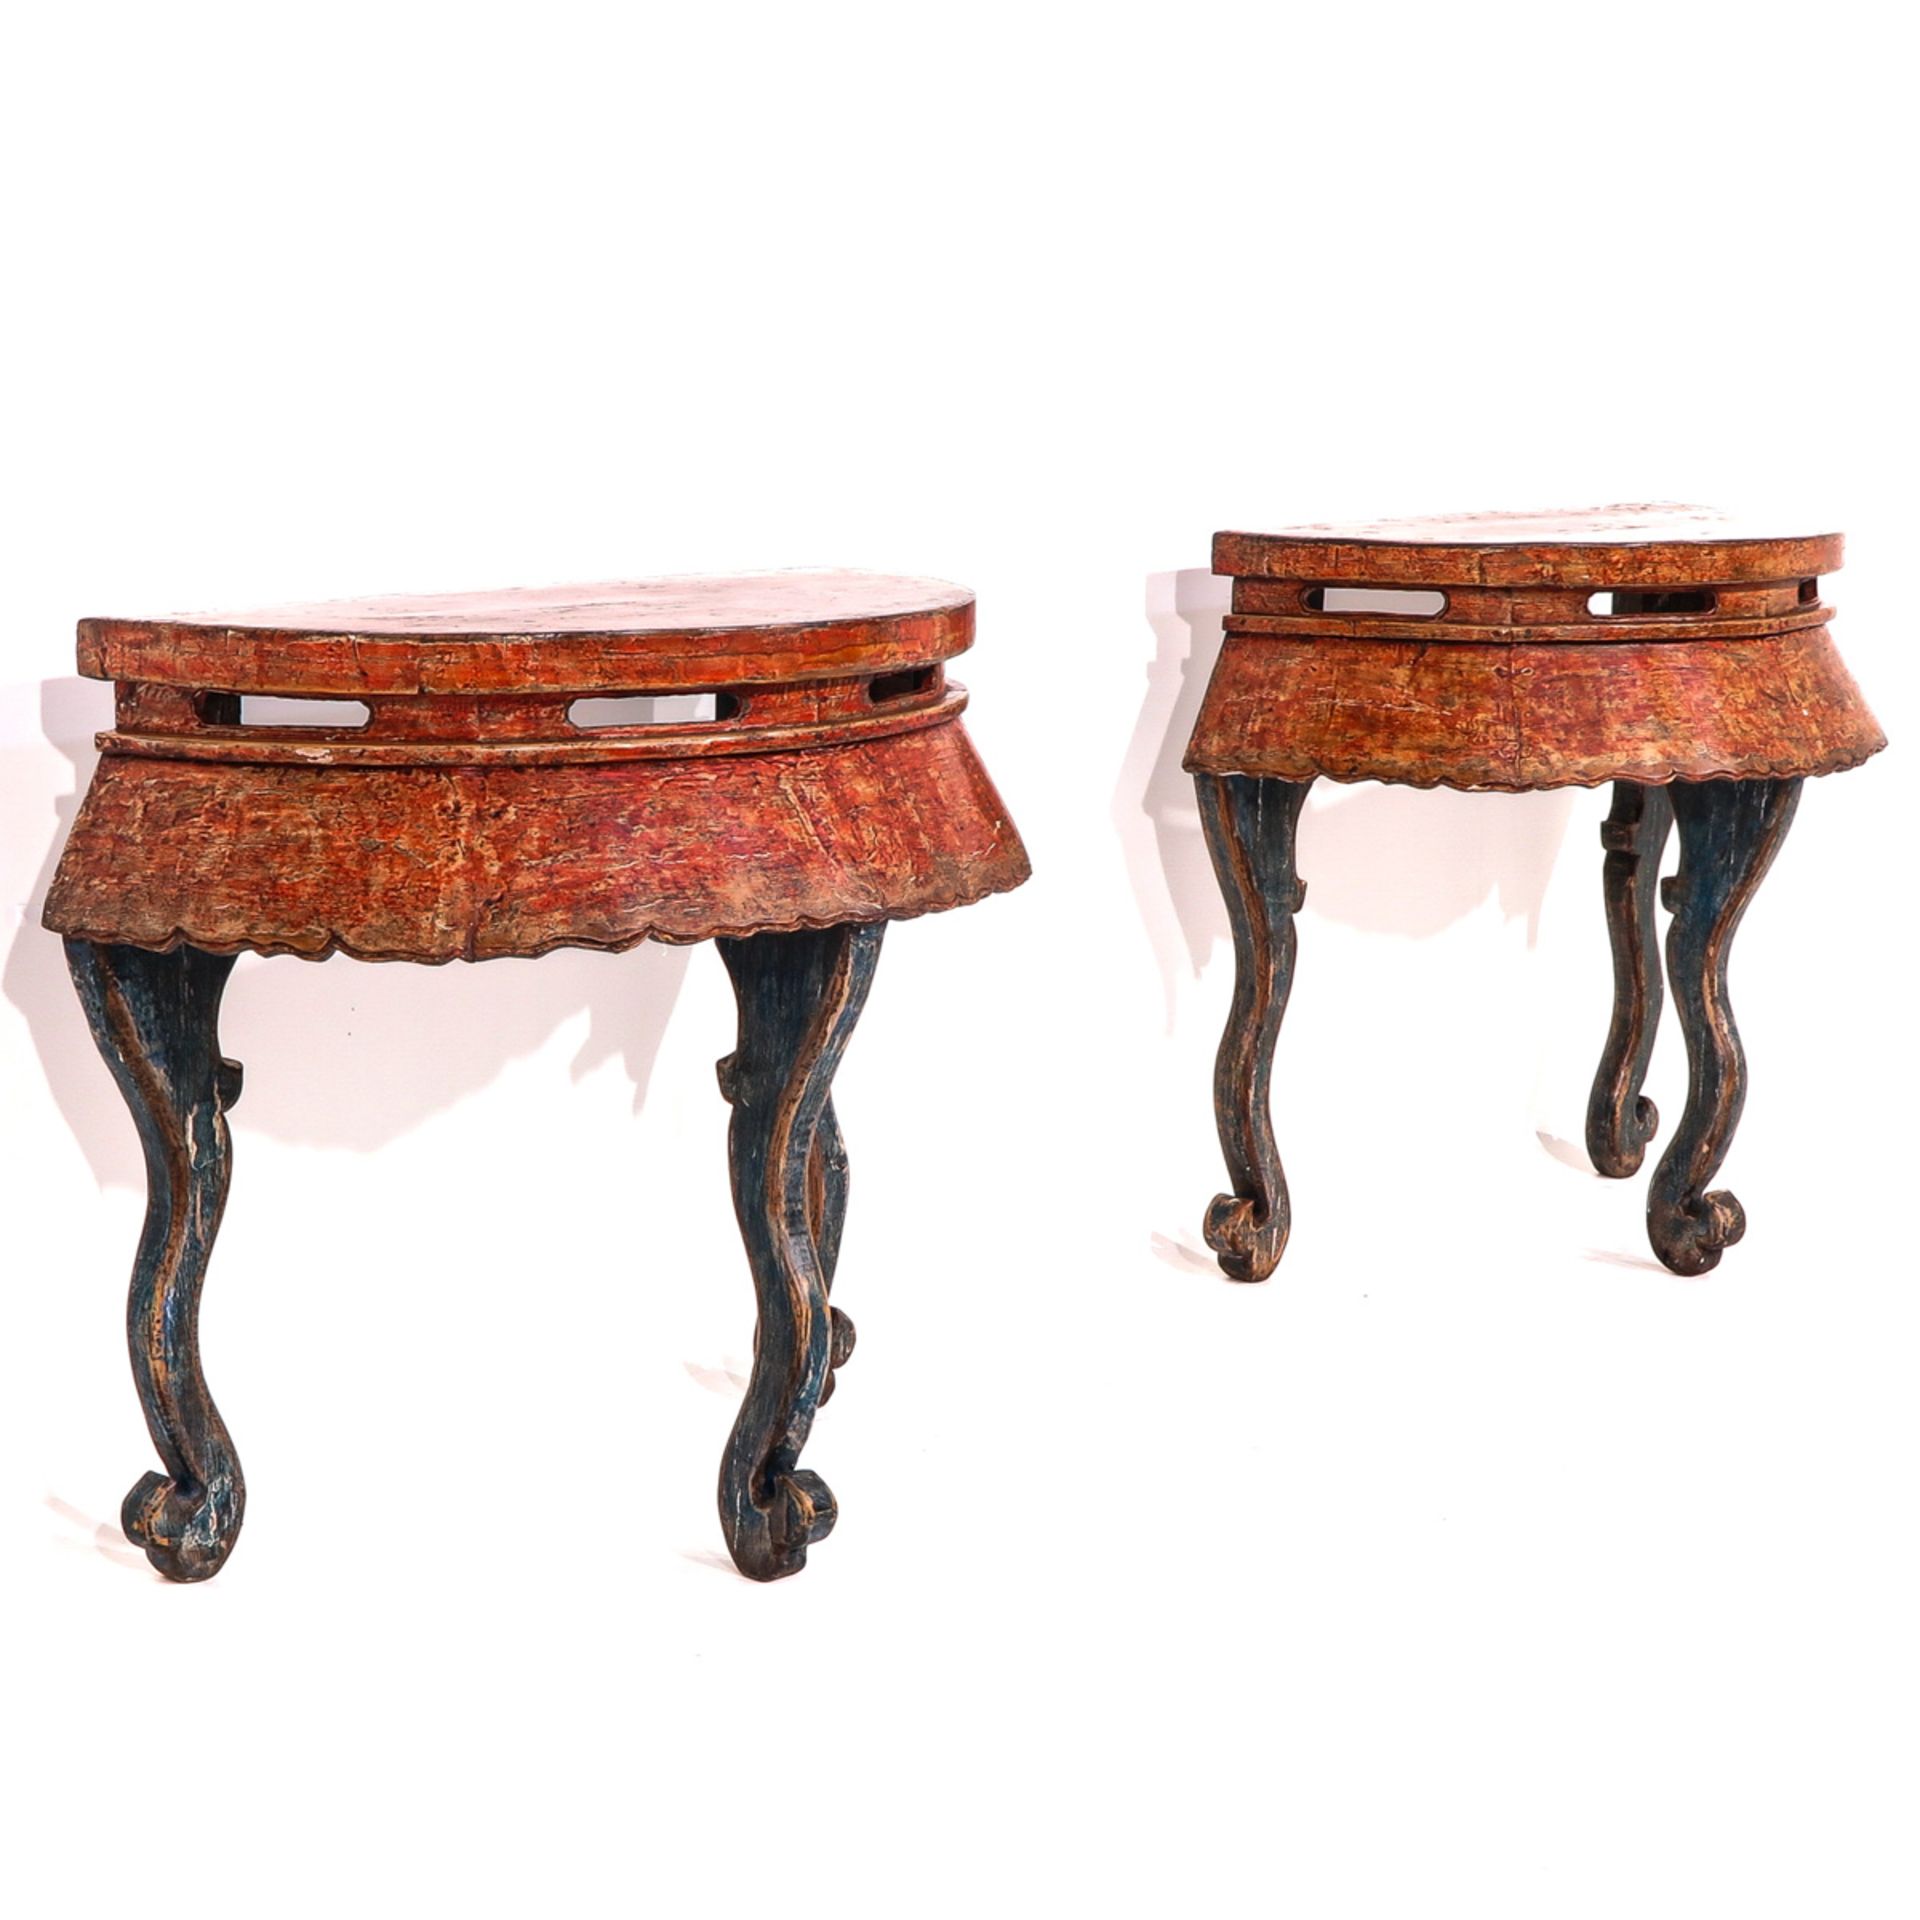 A Lot of 2 Demi Lune Console Tables - Image 2 of 8